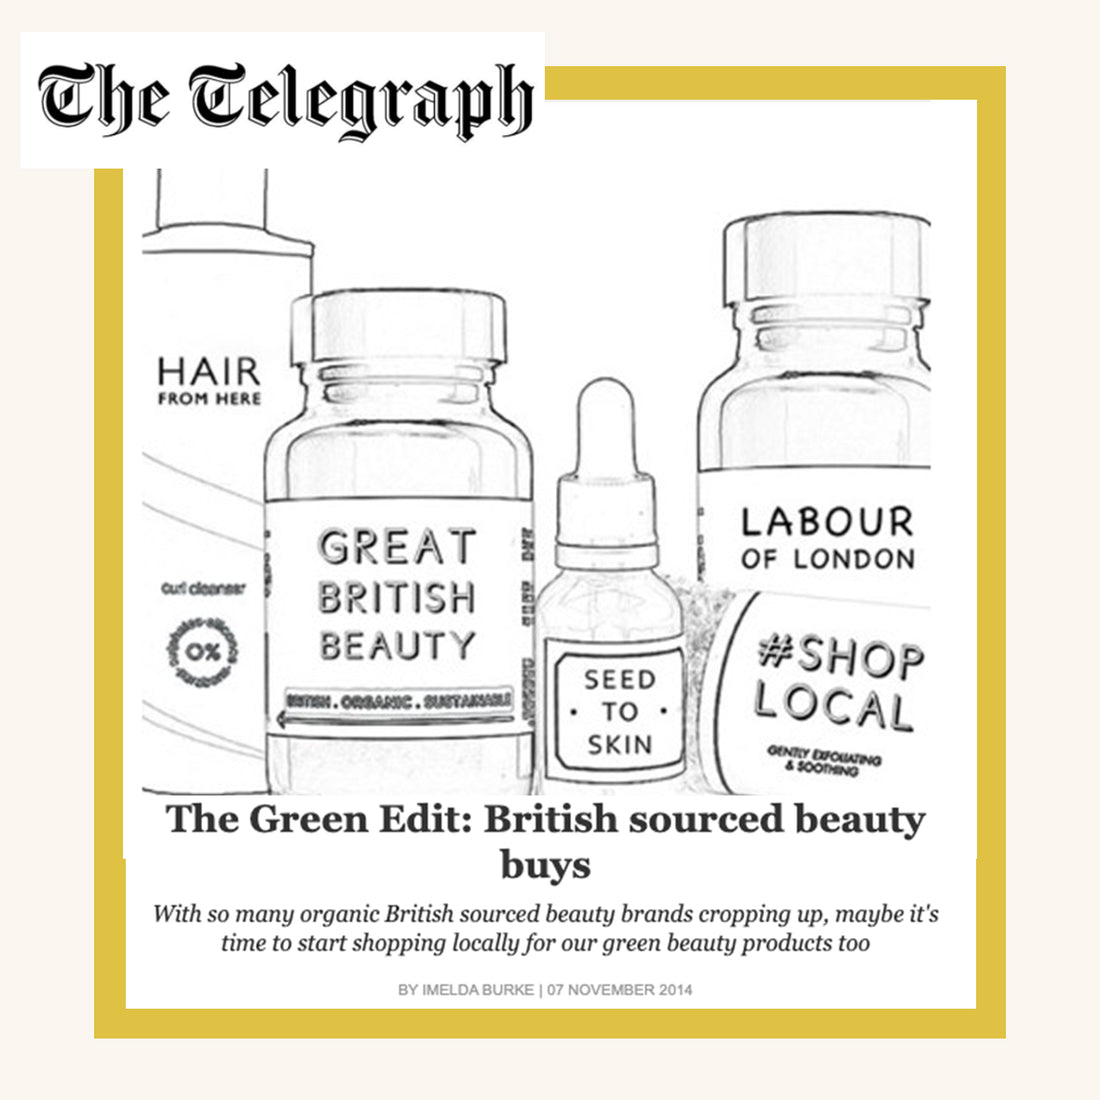 THE TELEGRAPH: The Green Edit